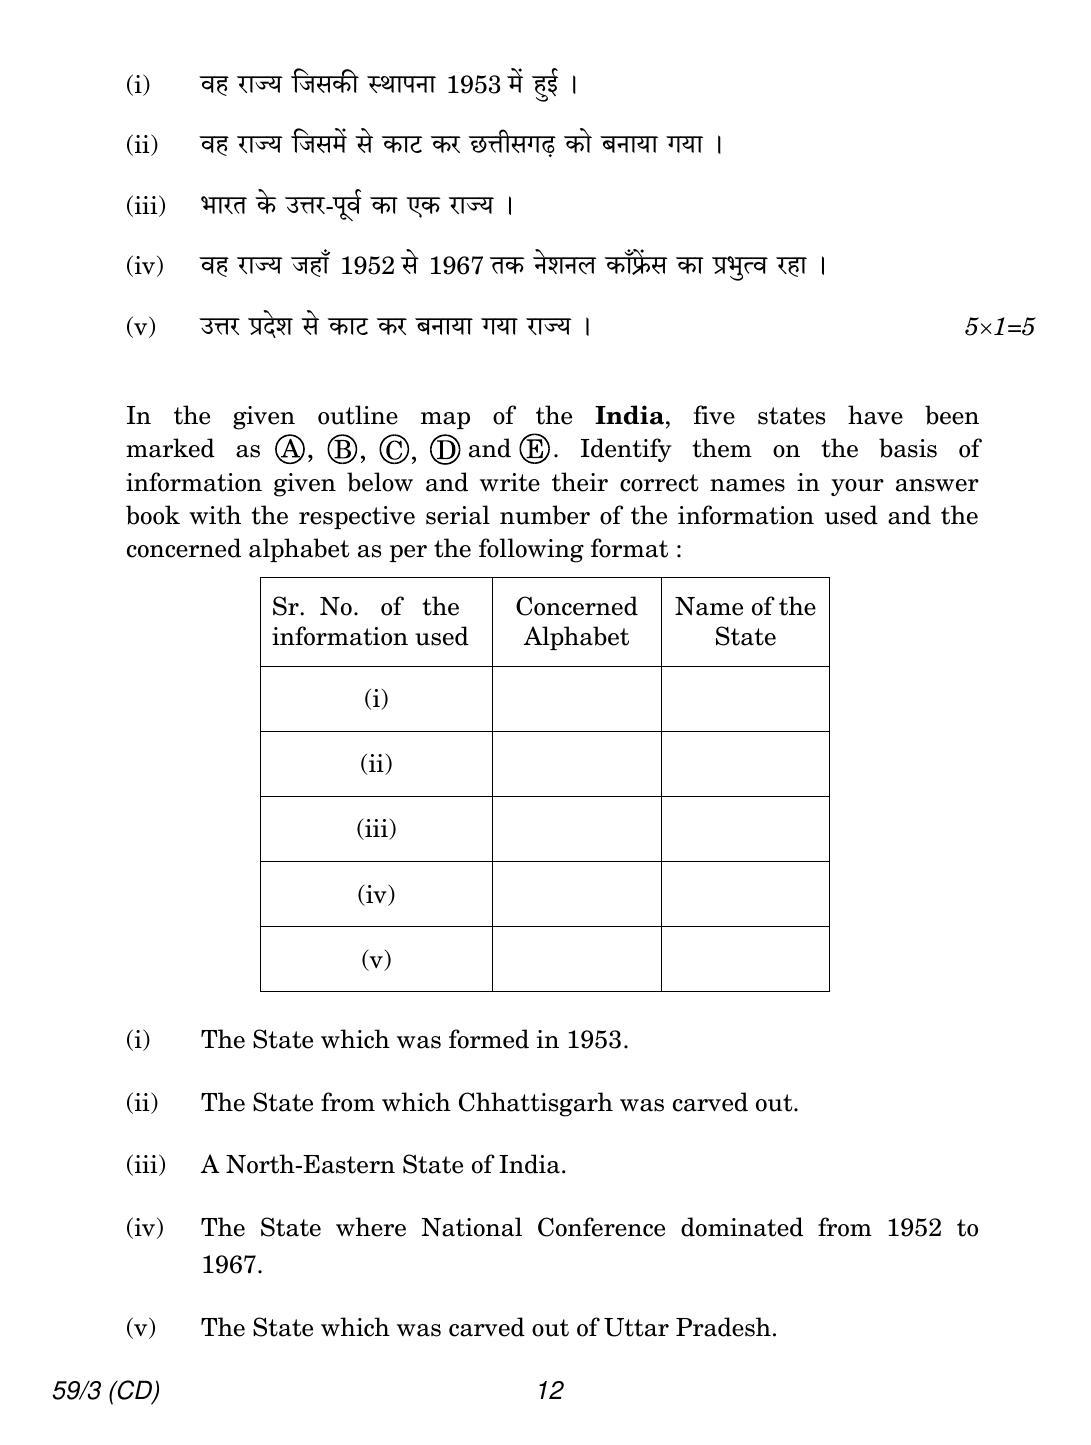 CBSE Class 12 59-3 POLITICAL SCIENCE CD 2018 Question Paper - Page 12